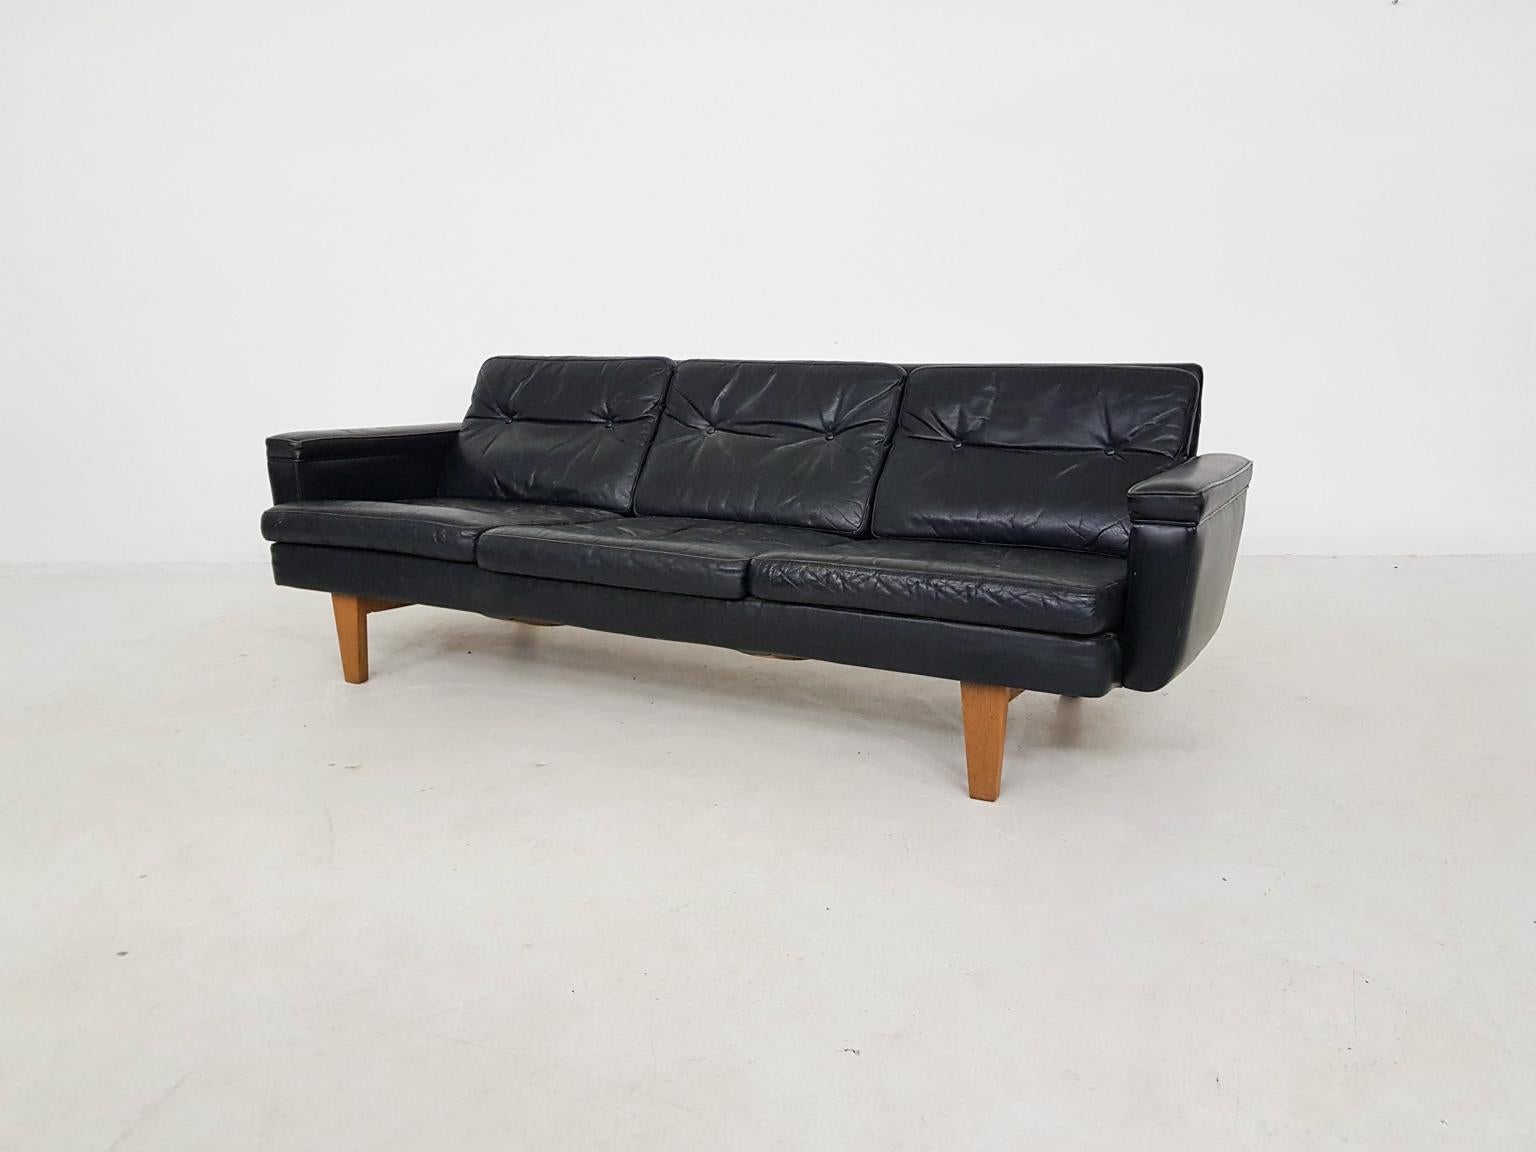 Very nice black leather vintage design sofa on wooden feet.

A repair to the right arm rest.

Marked at the bottom.